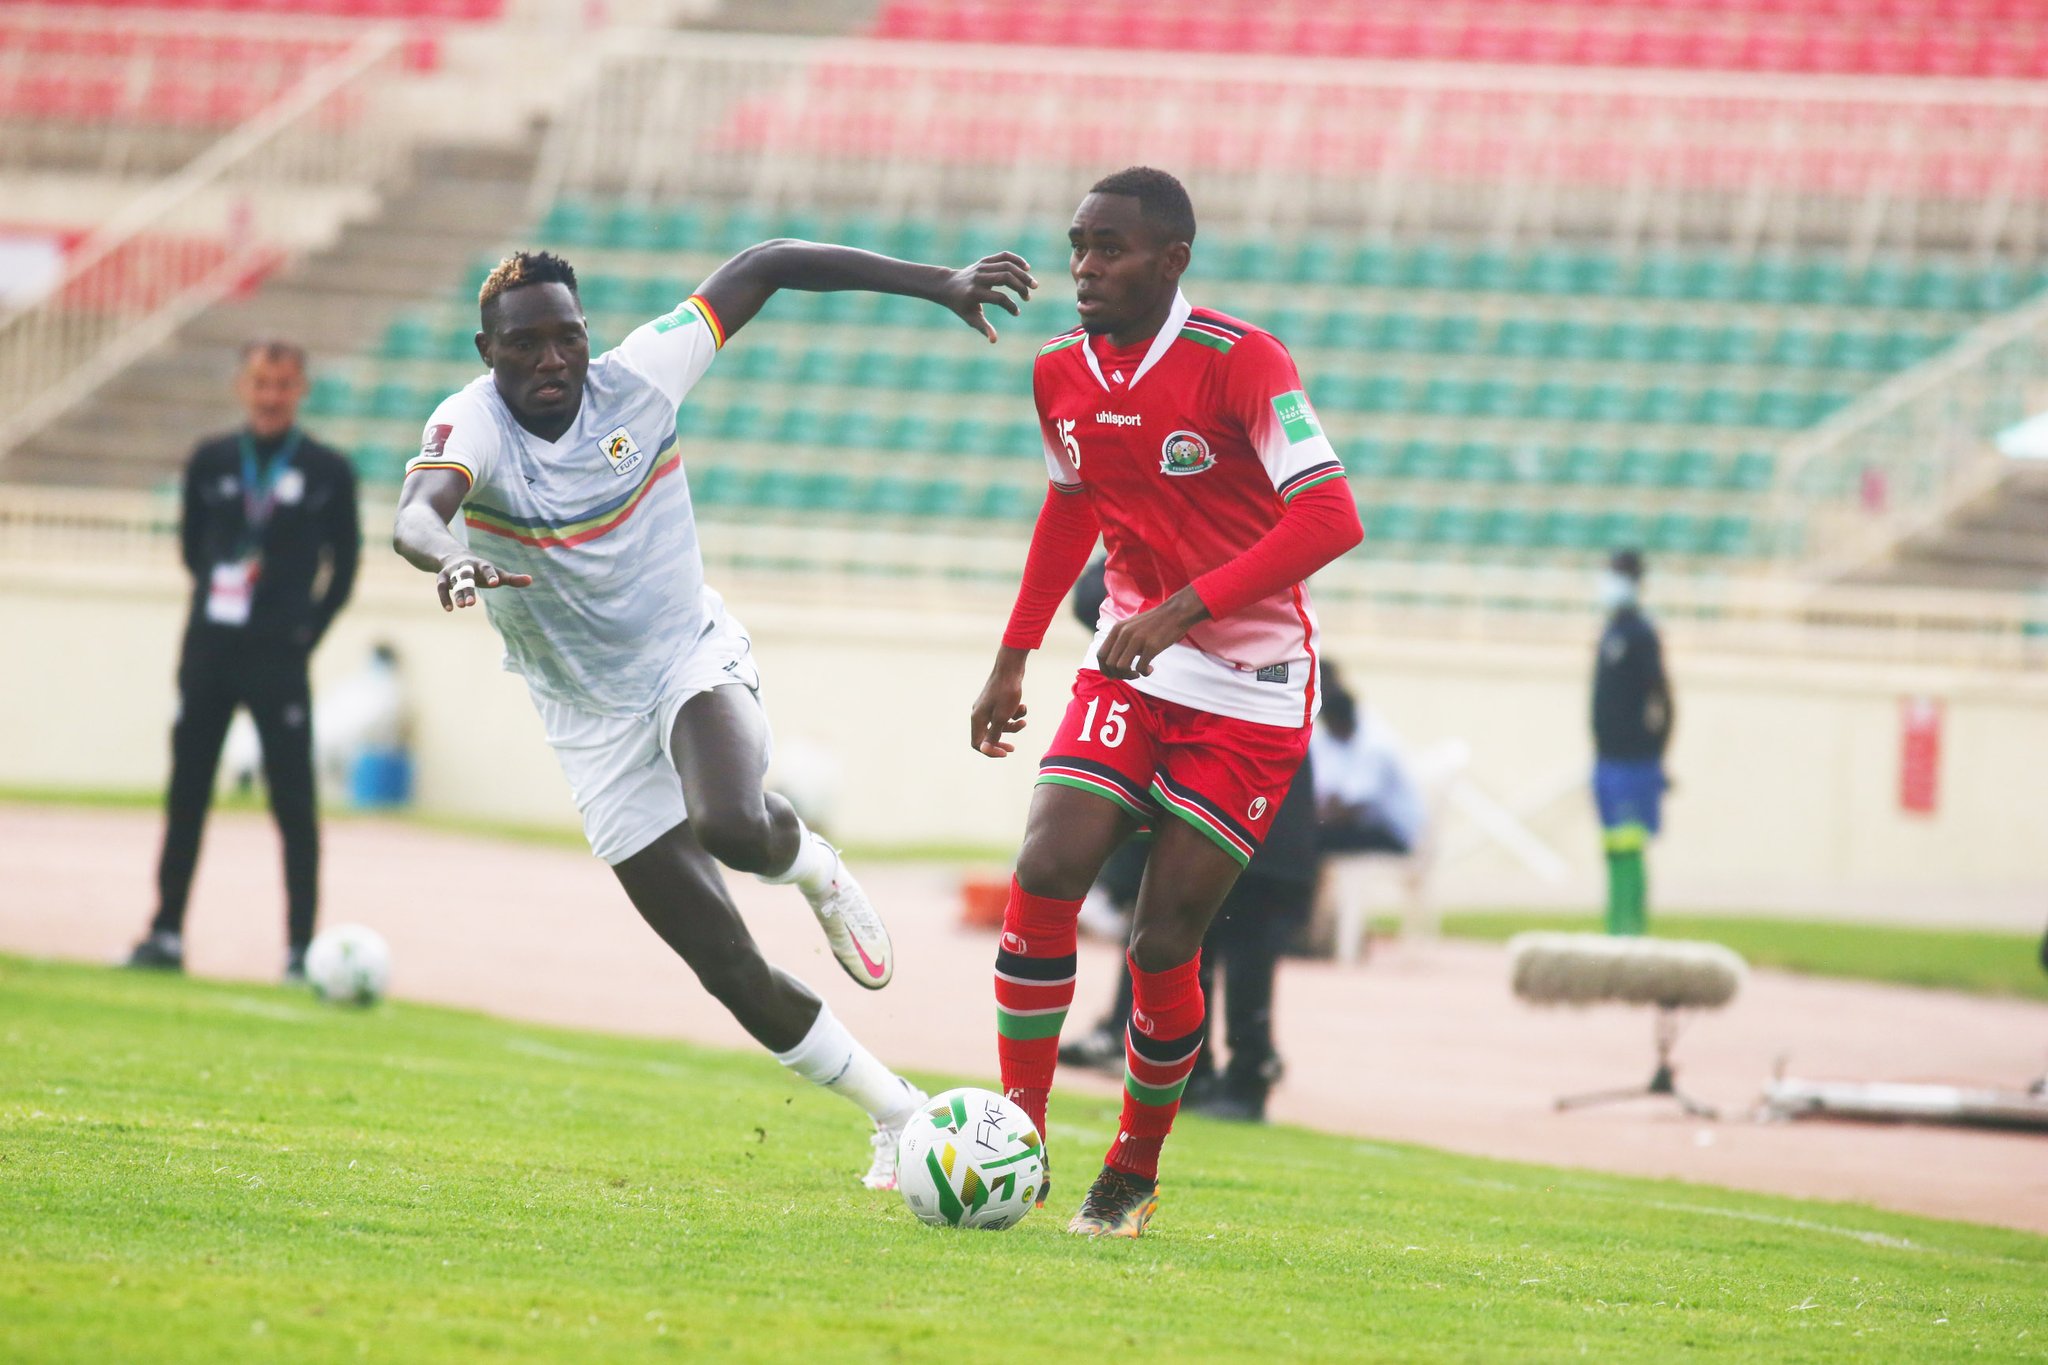 Harambee Stars Held to a goalless draw in World Cup qualifier | Kenya